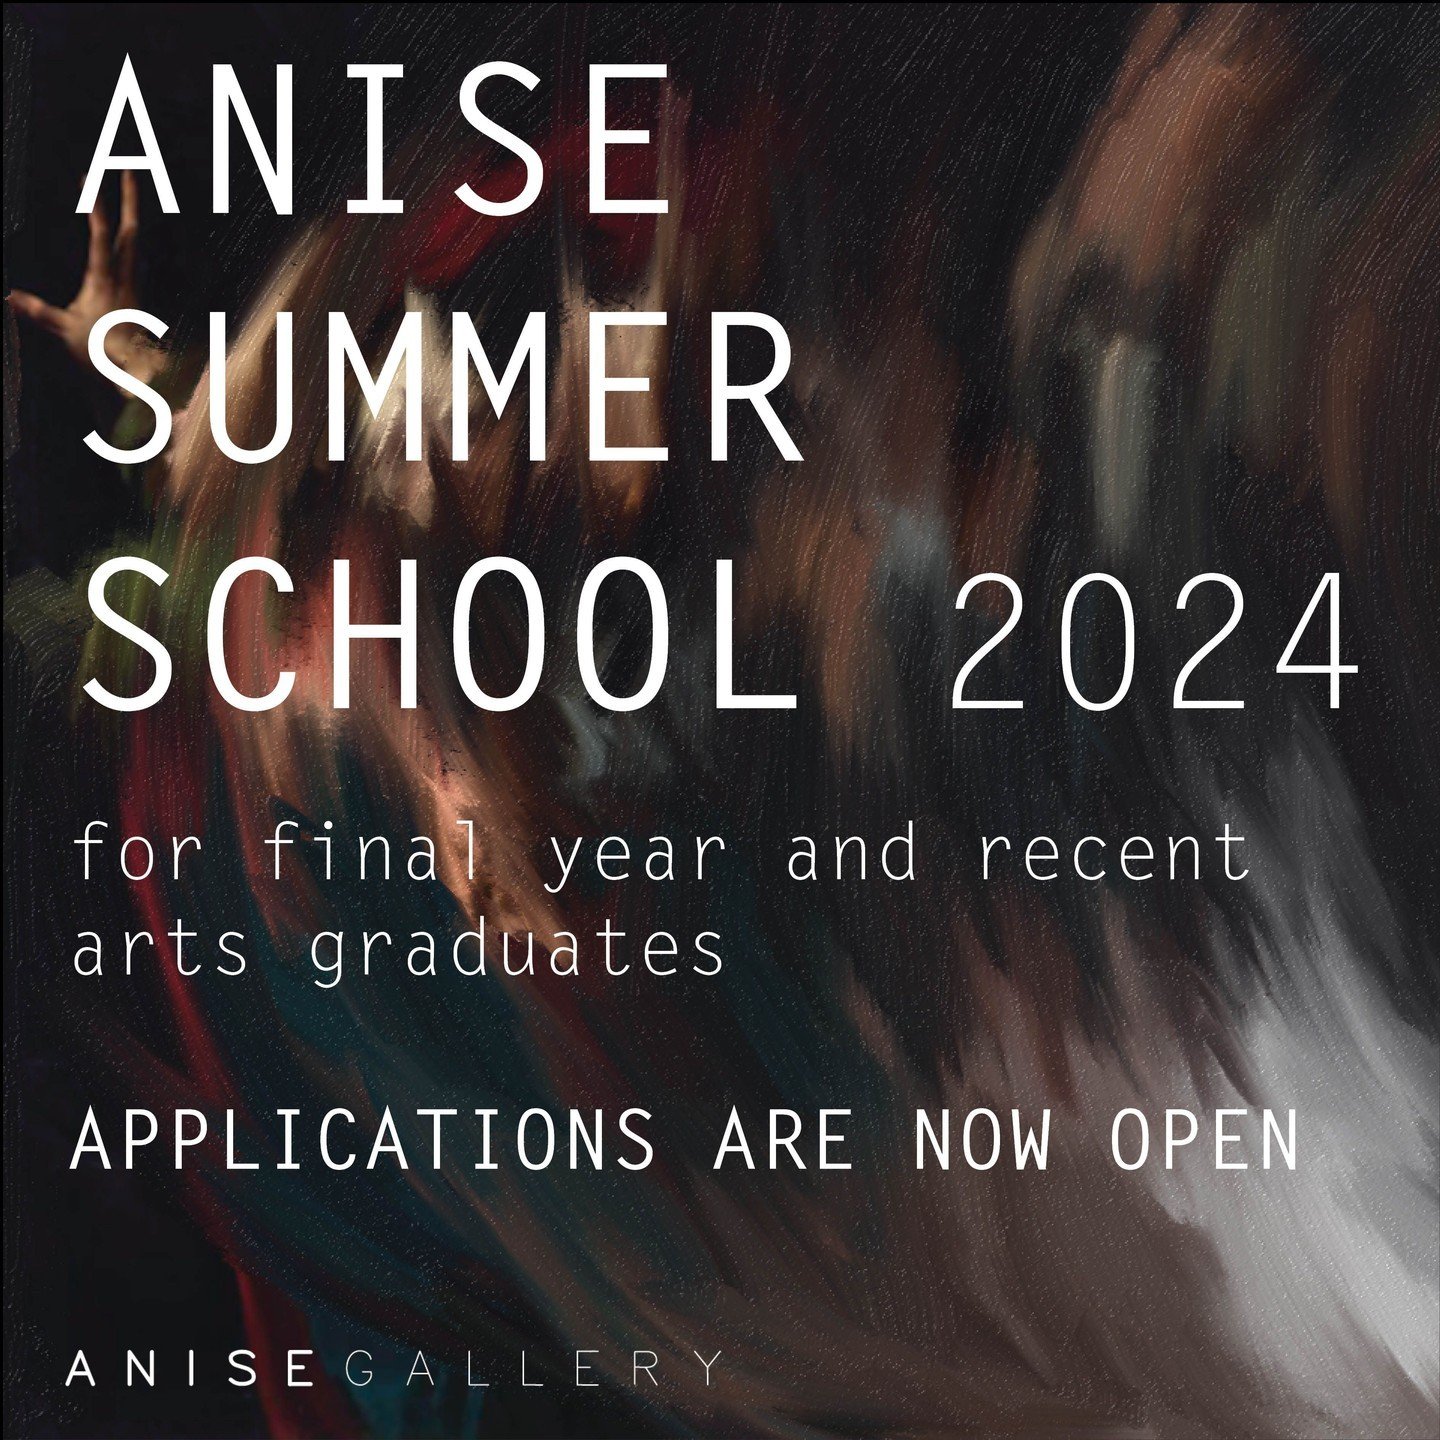 I am excited to announce my participation as a moderator at the Anise Summer School this 4th &amp; 5th July! The Anise Summer School will be a two day programme packed with talks, workshops, portfolio reviews and thought-provoking panel discussions w